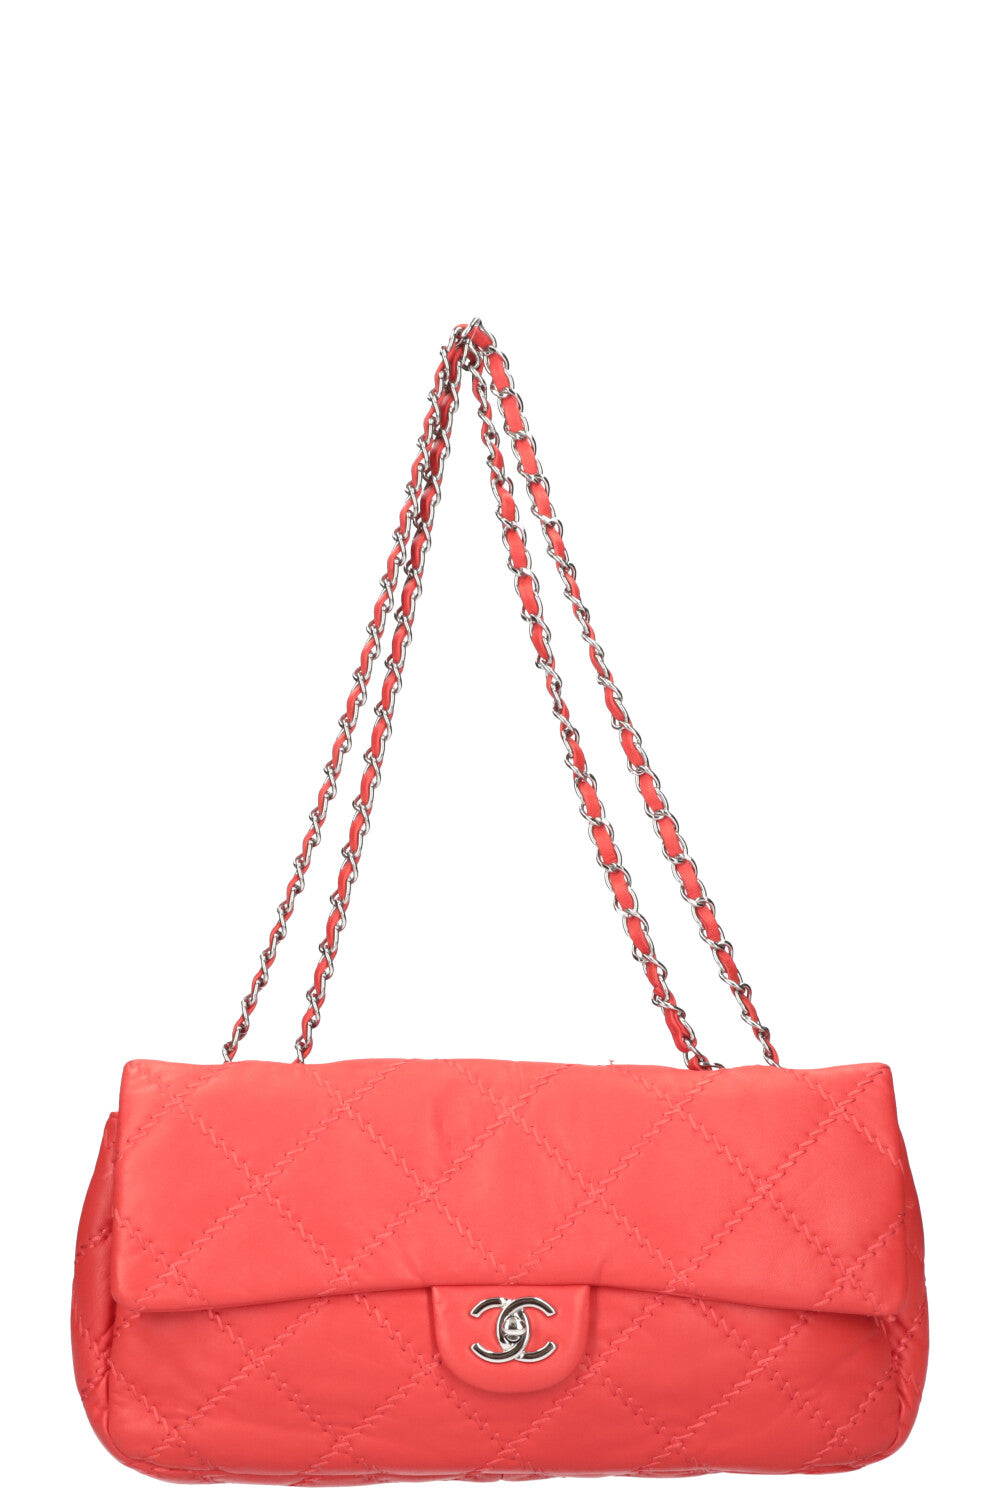 CHANEL Single Flap Bag Red